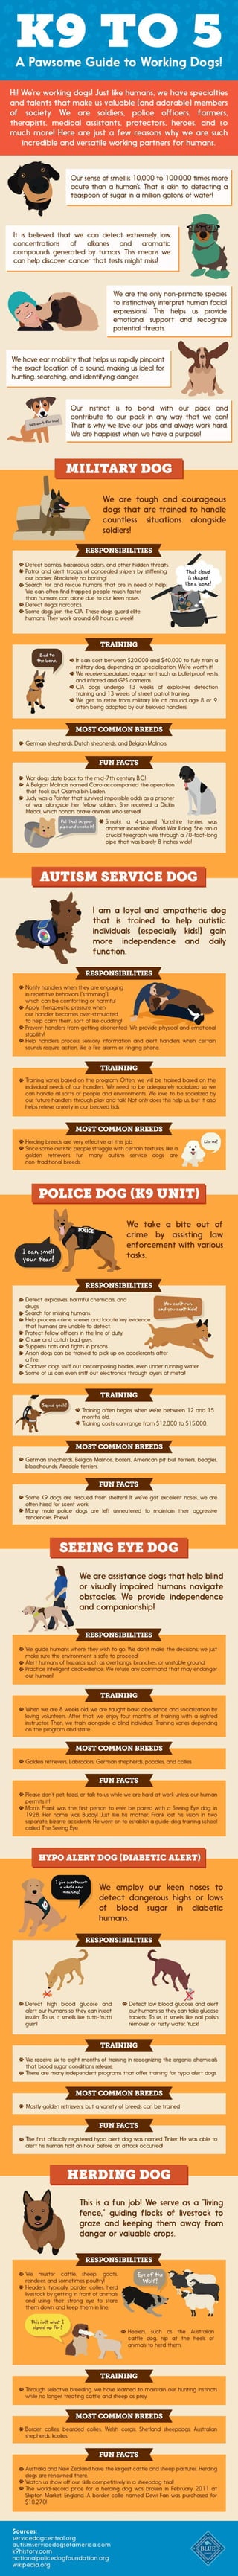 K9 to 5: A Pawsome Guide to Working Dogs!